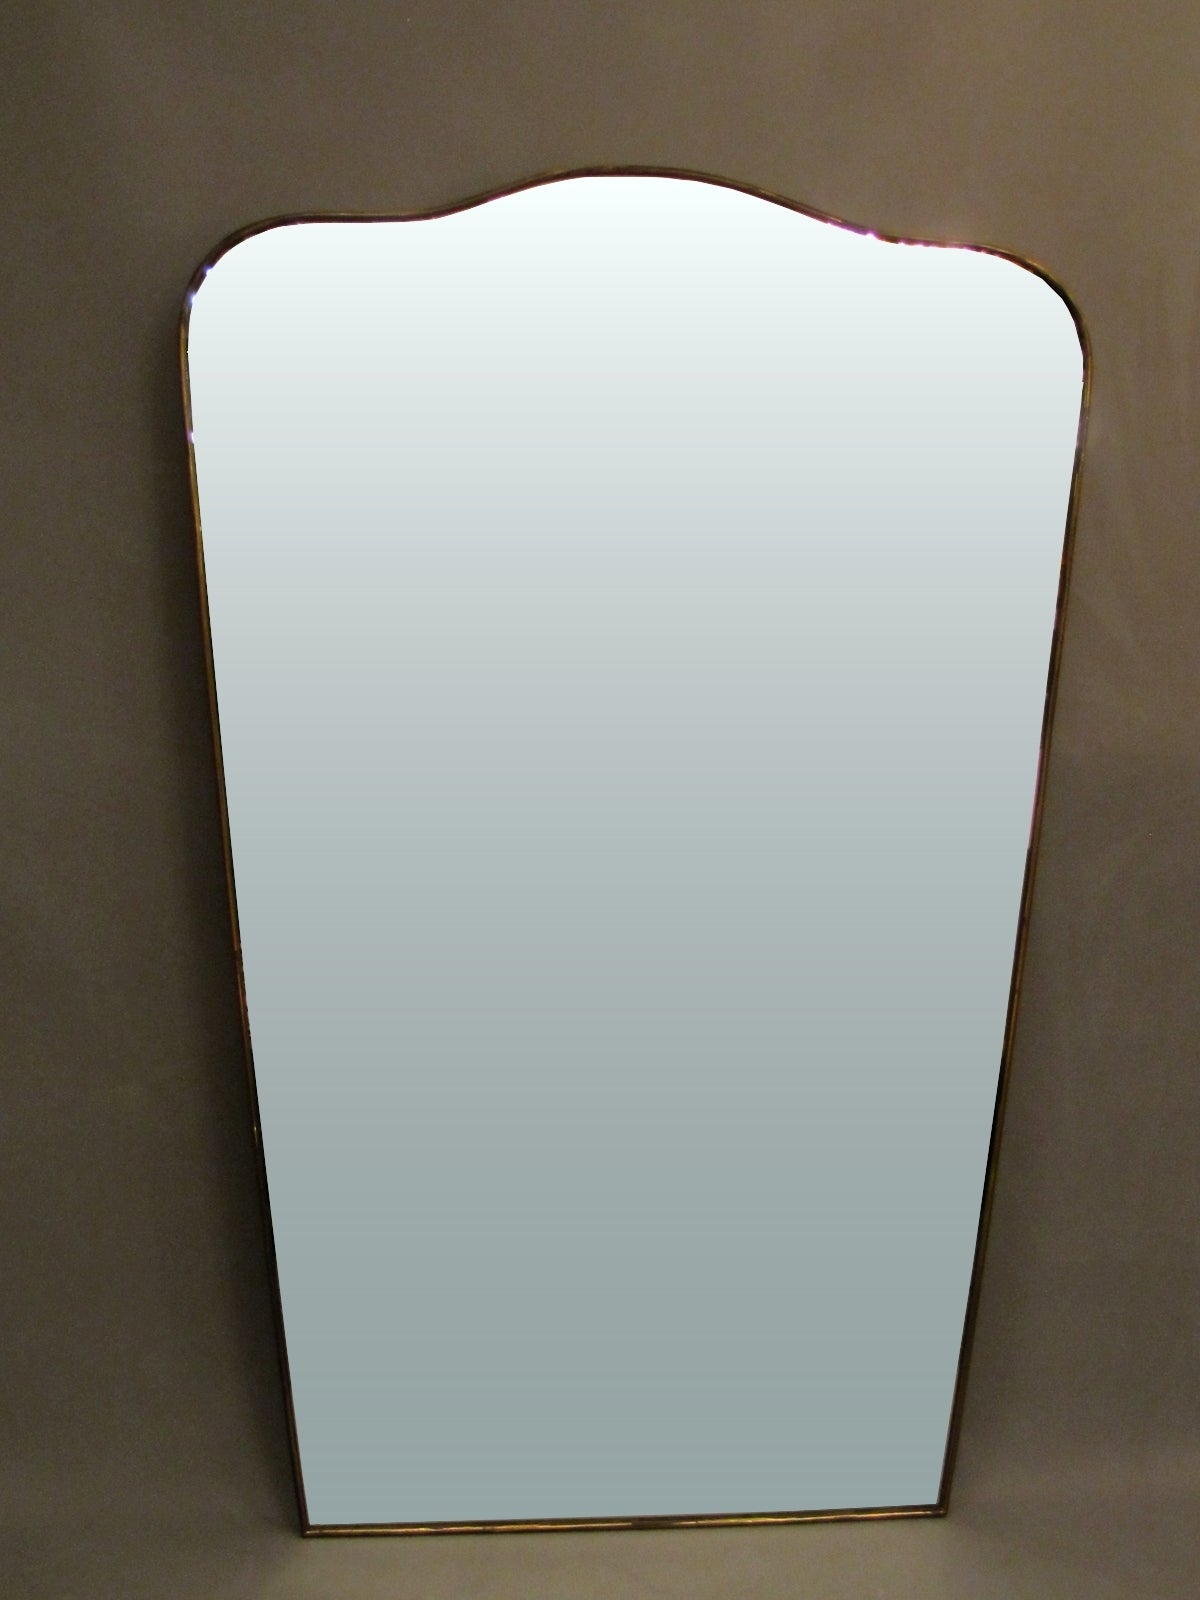 Large 1950s Italian mirror with brass frame, shaped as escutcheon.
The lower width of mirror is 23.62 in.